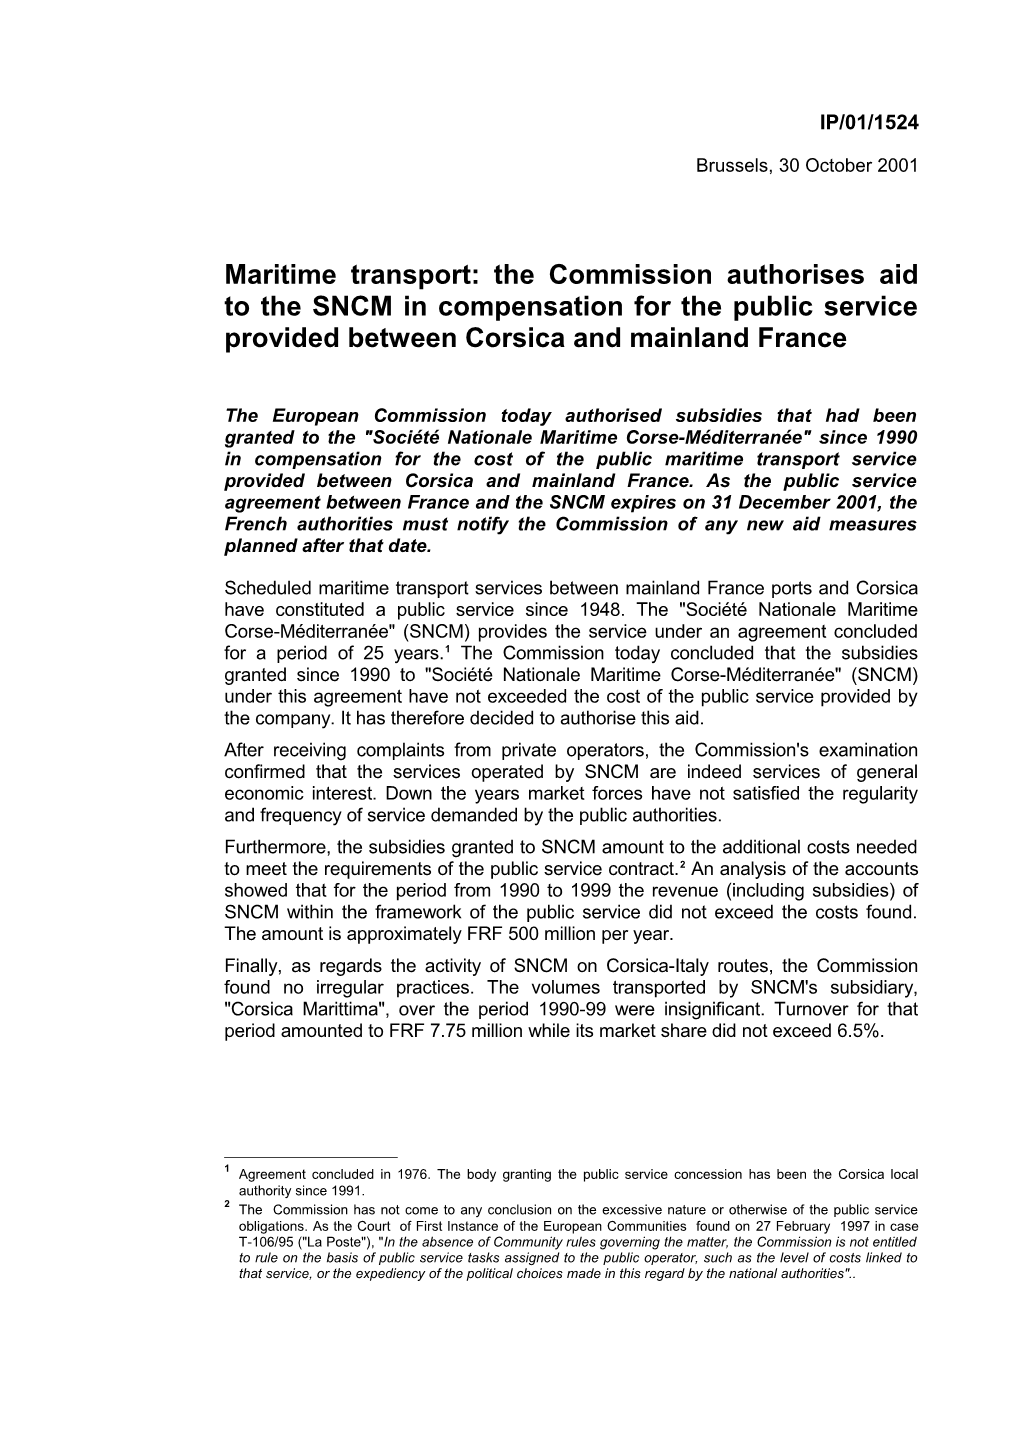 Maritime Transport: the Commission Authorises Aid to the SNCM in Compensation for The